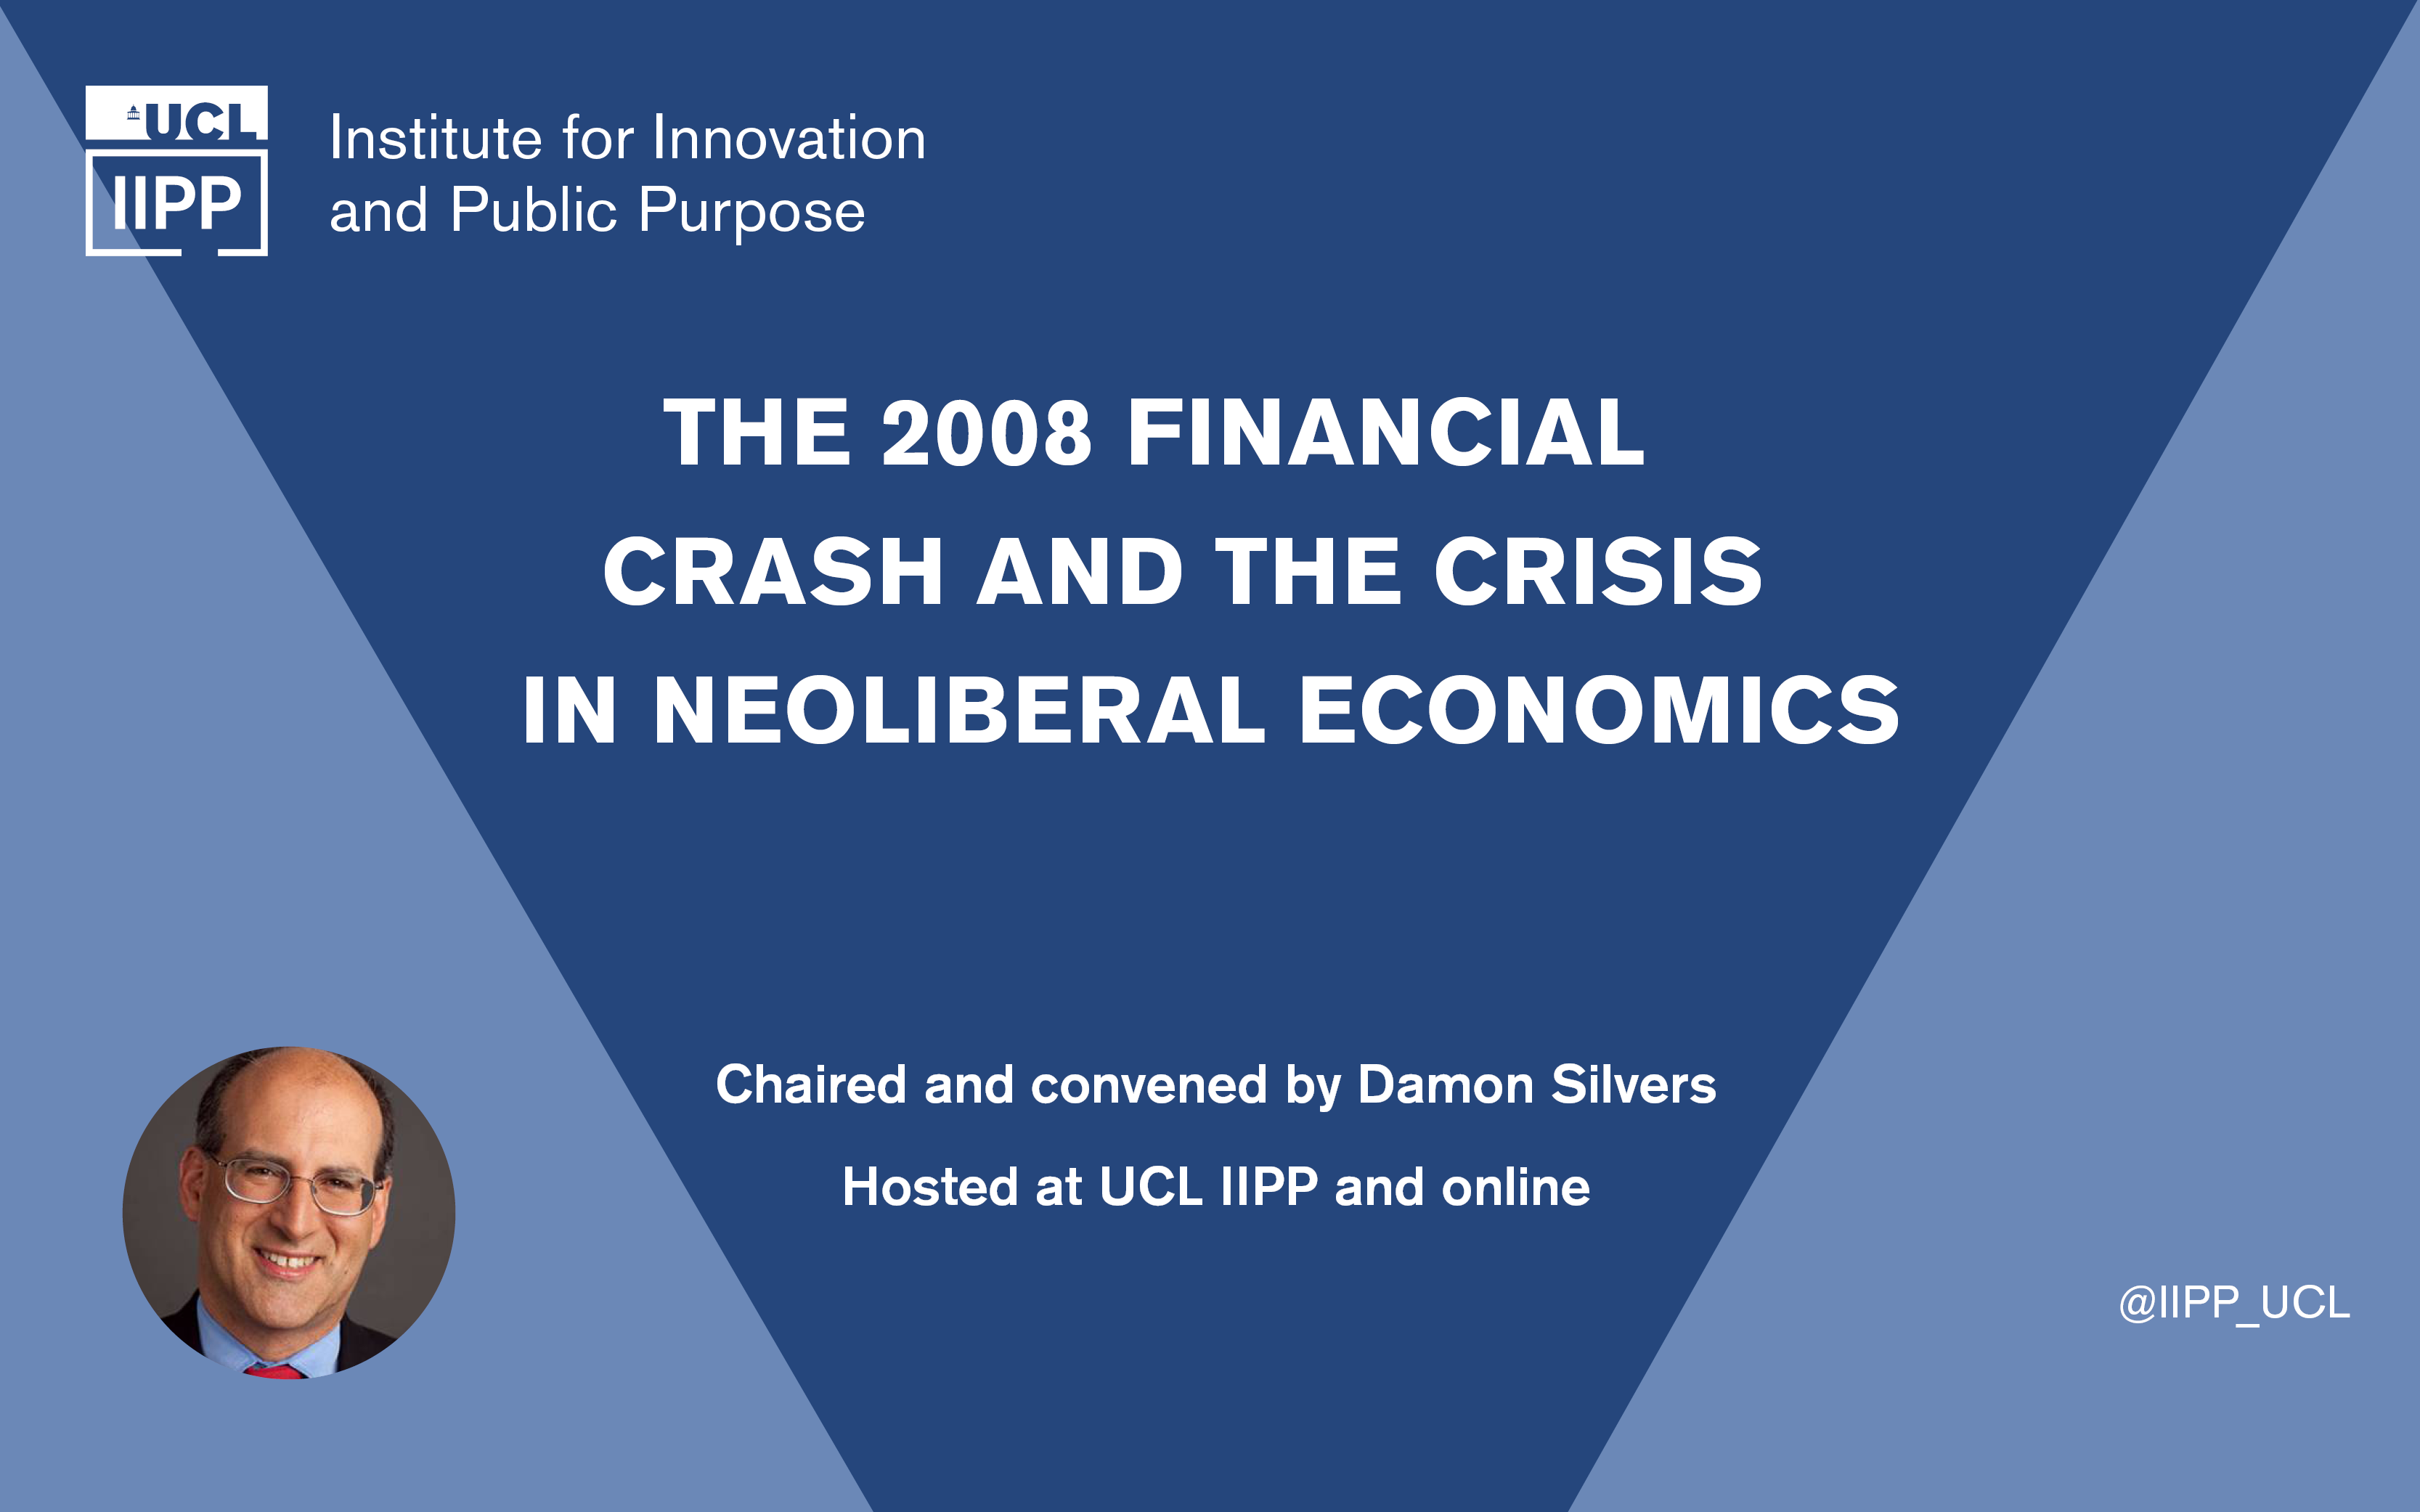 The 2008 Financial Crash and the Crisis in Neoliberal Economics with Damon Silvers at UCL IIPP